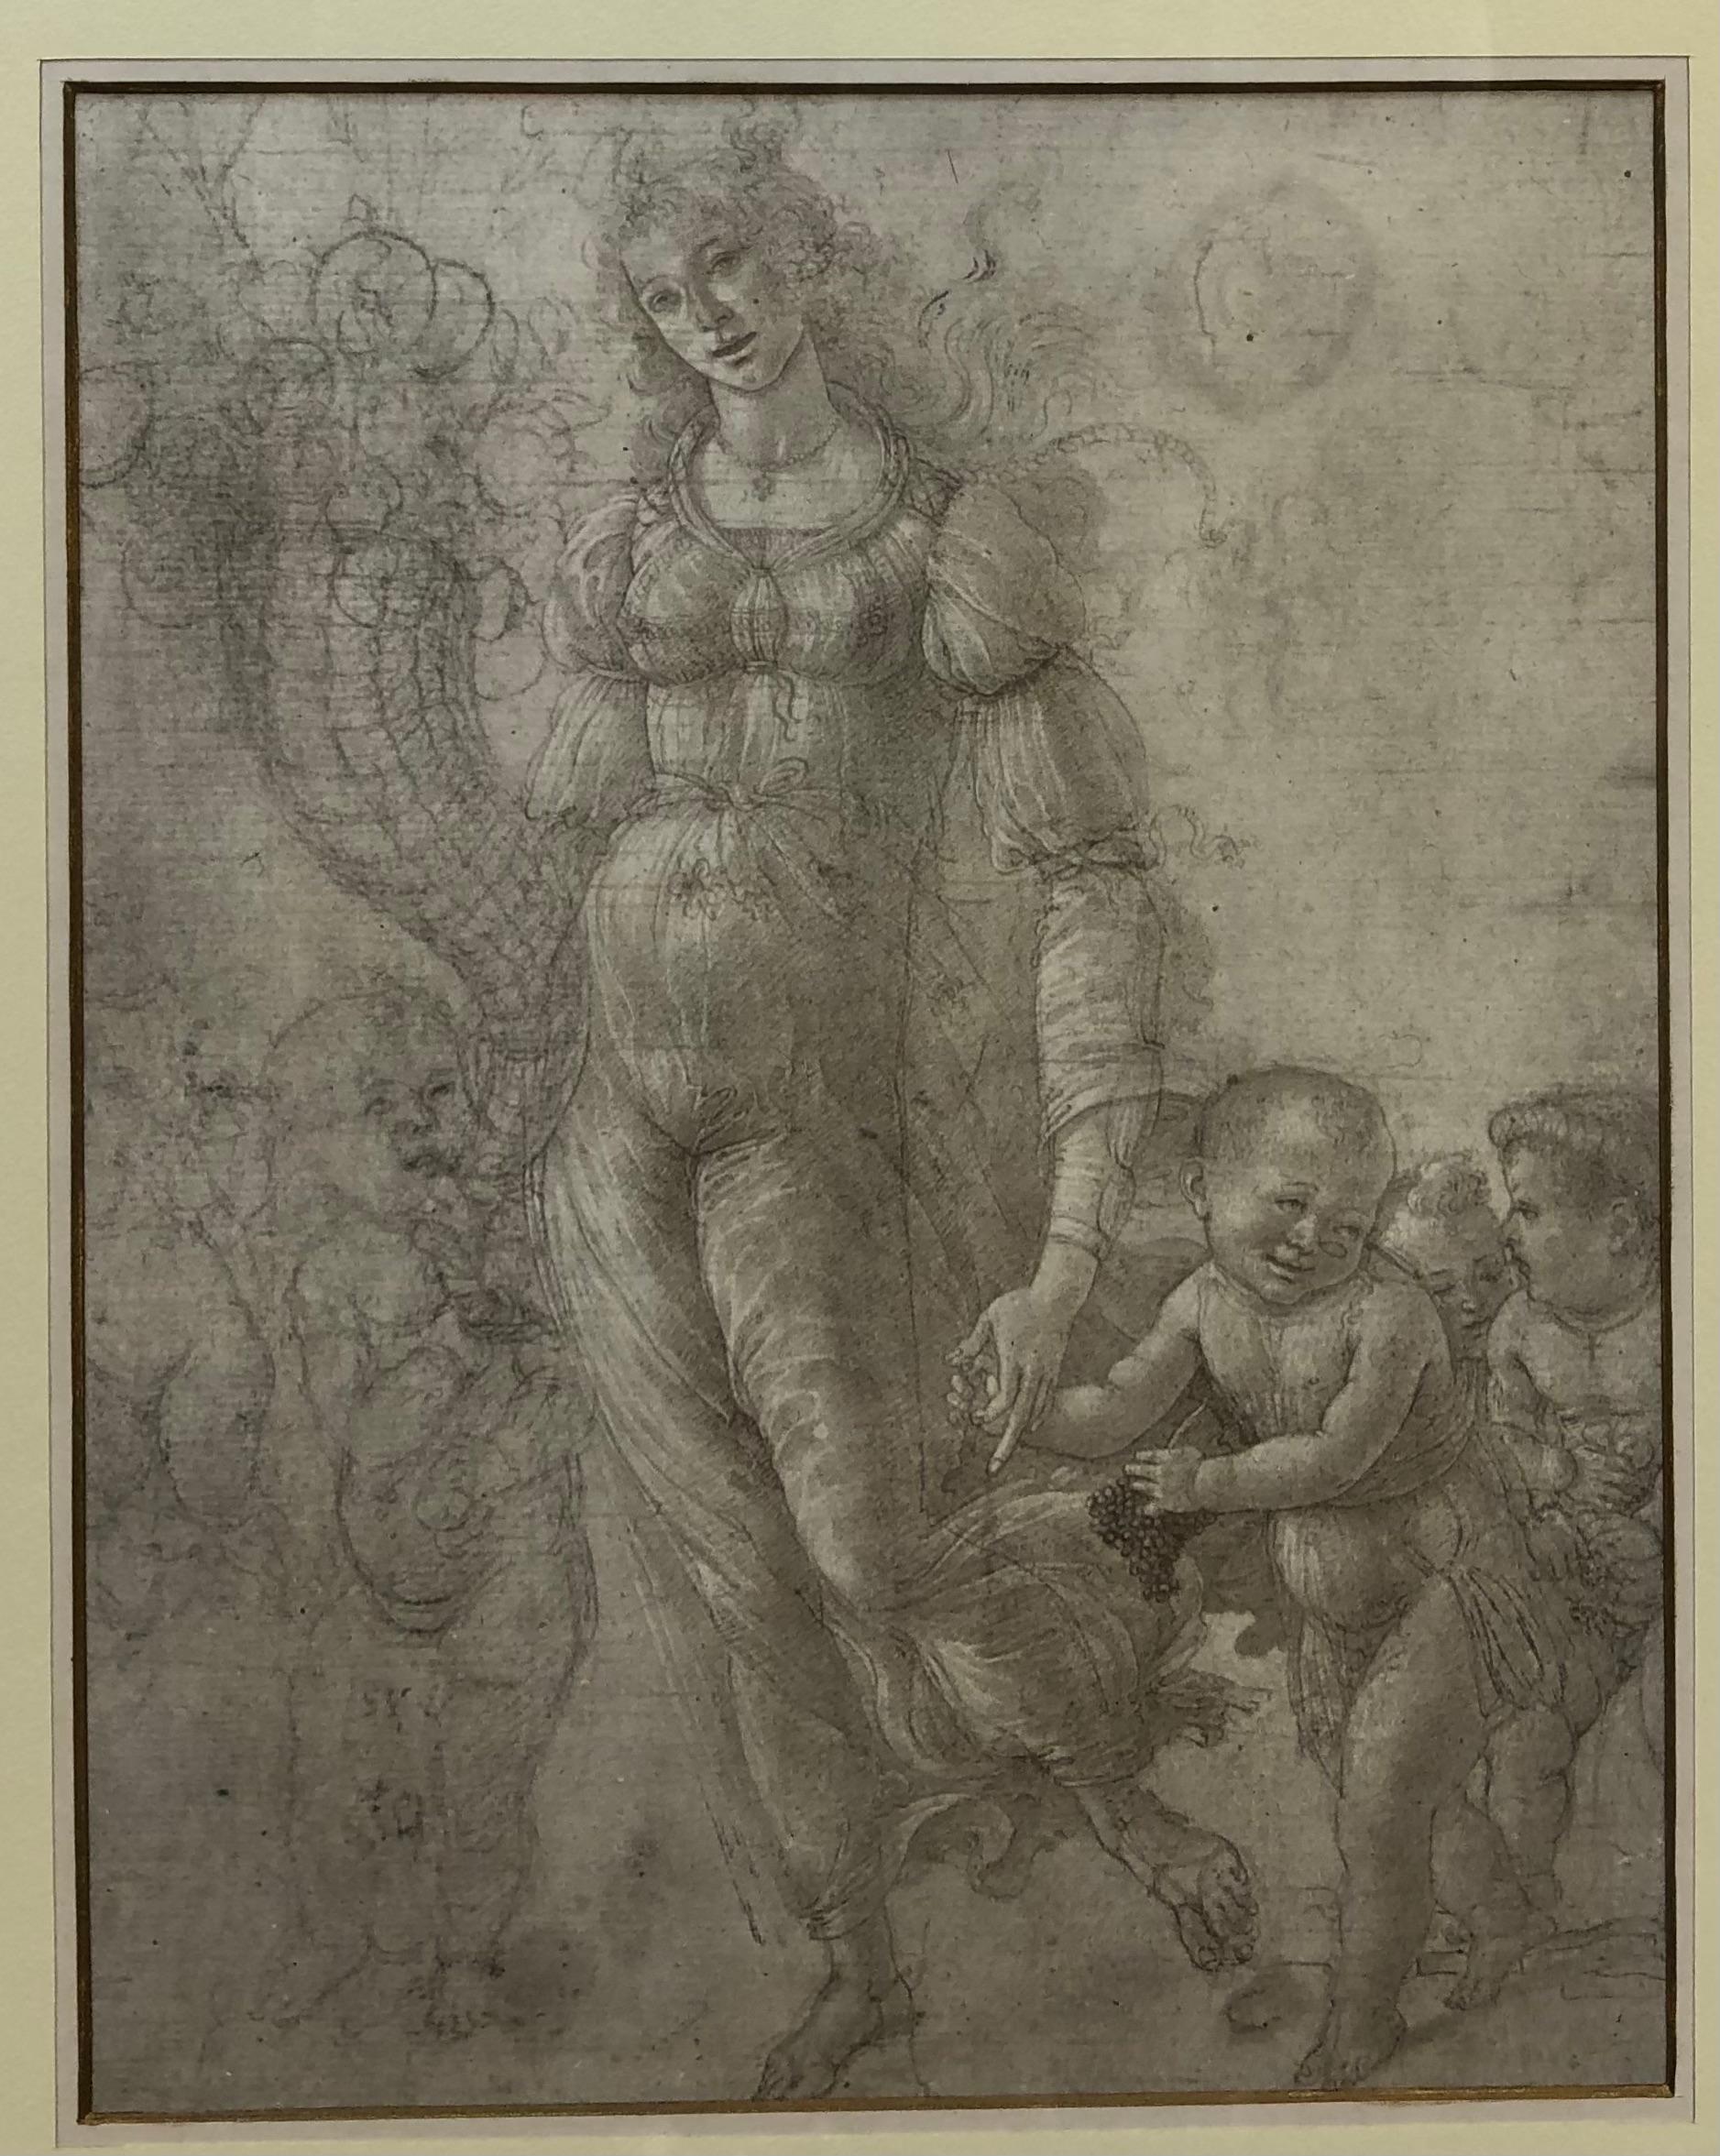 A playful neoclassical drawing of a woman with children framed by the Medici Society in London.
Presented in a professional gilt wood frame. 

Measures: 15 7/8